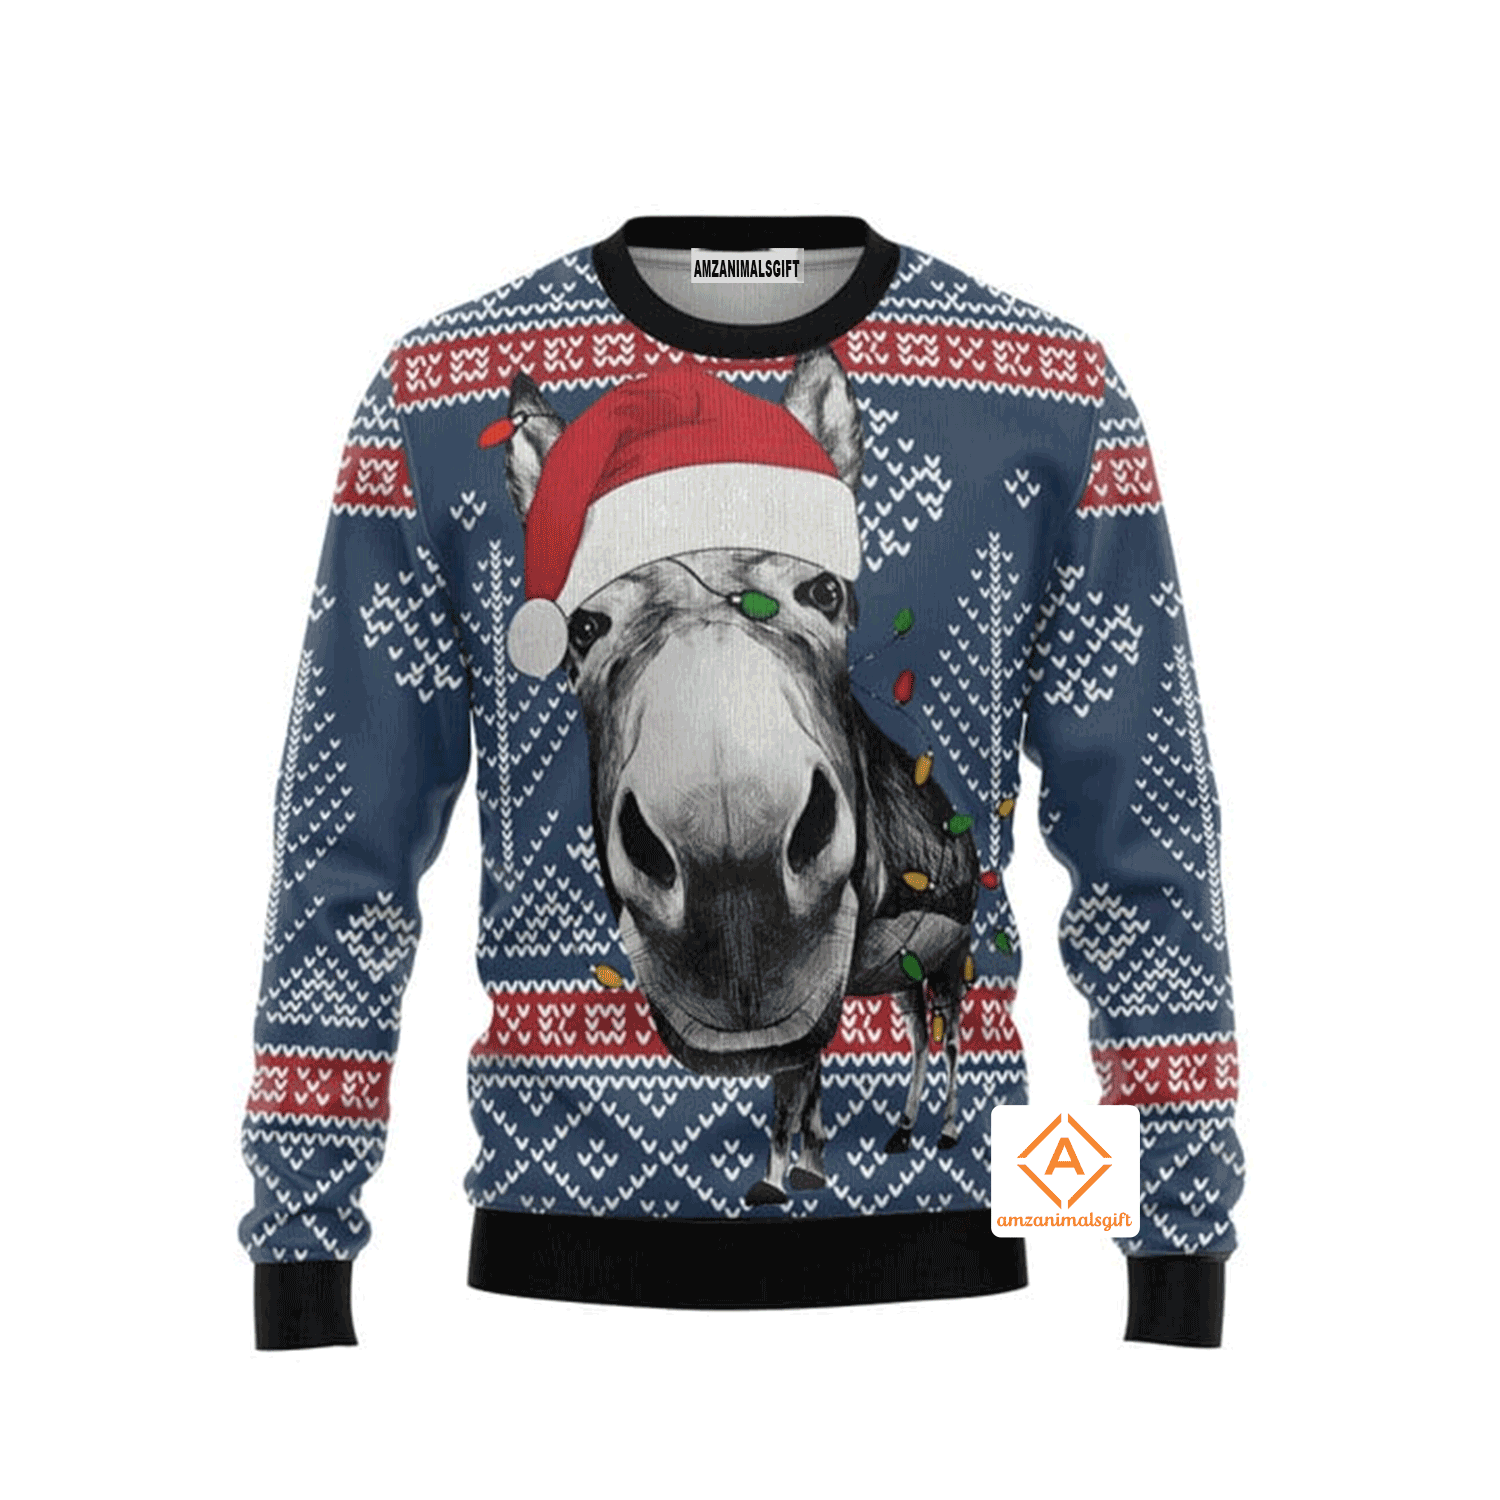 Donkey Funny Christmas Sweater, Ugly Sweater For Men & Women, Perfect Outfit For Christmas New Year Autumn Winter